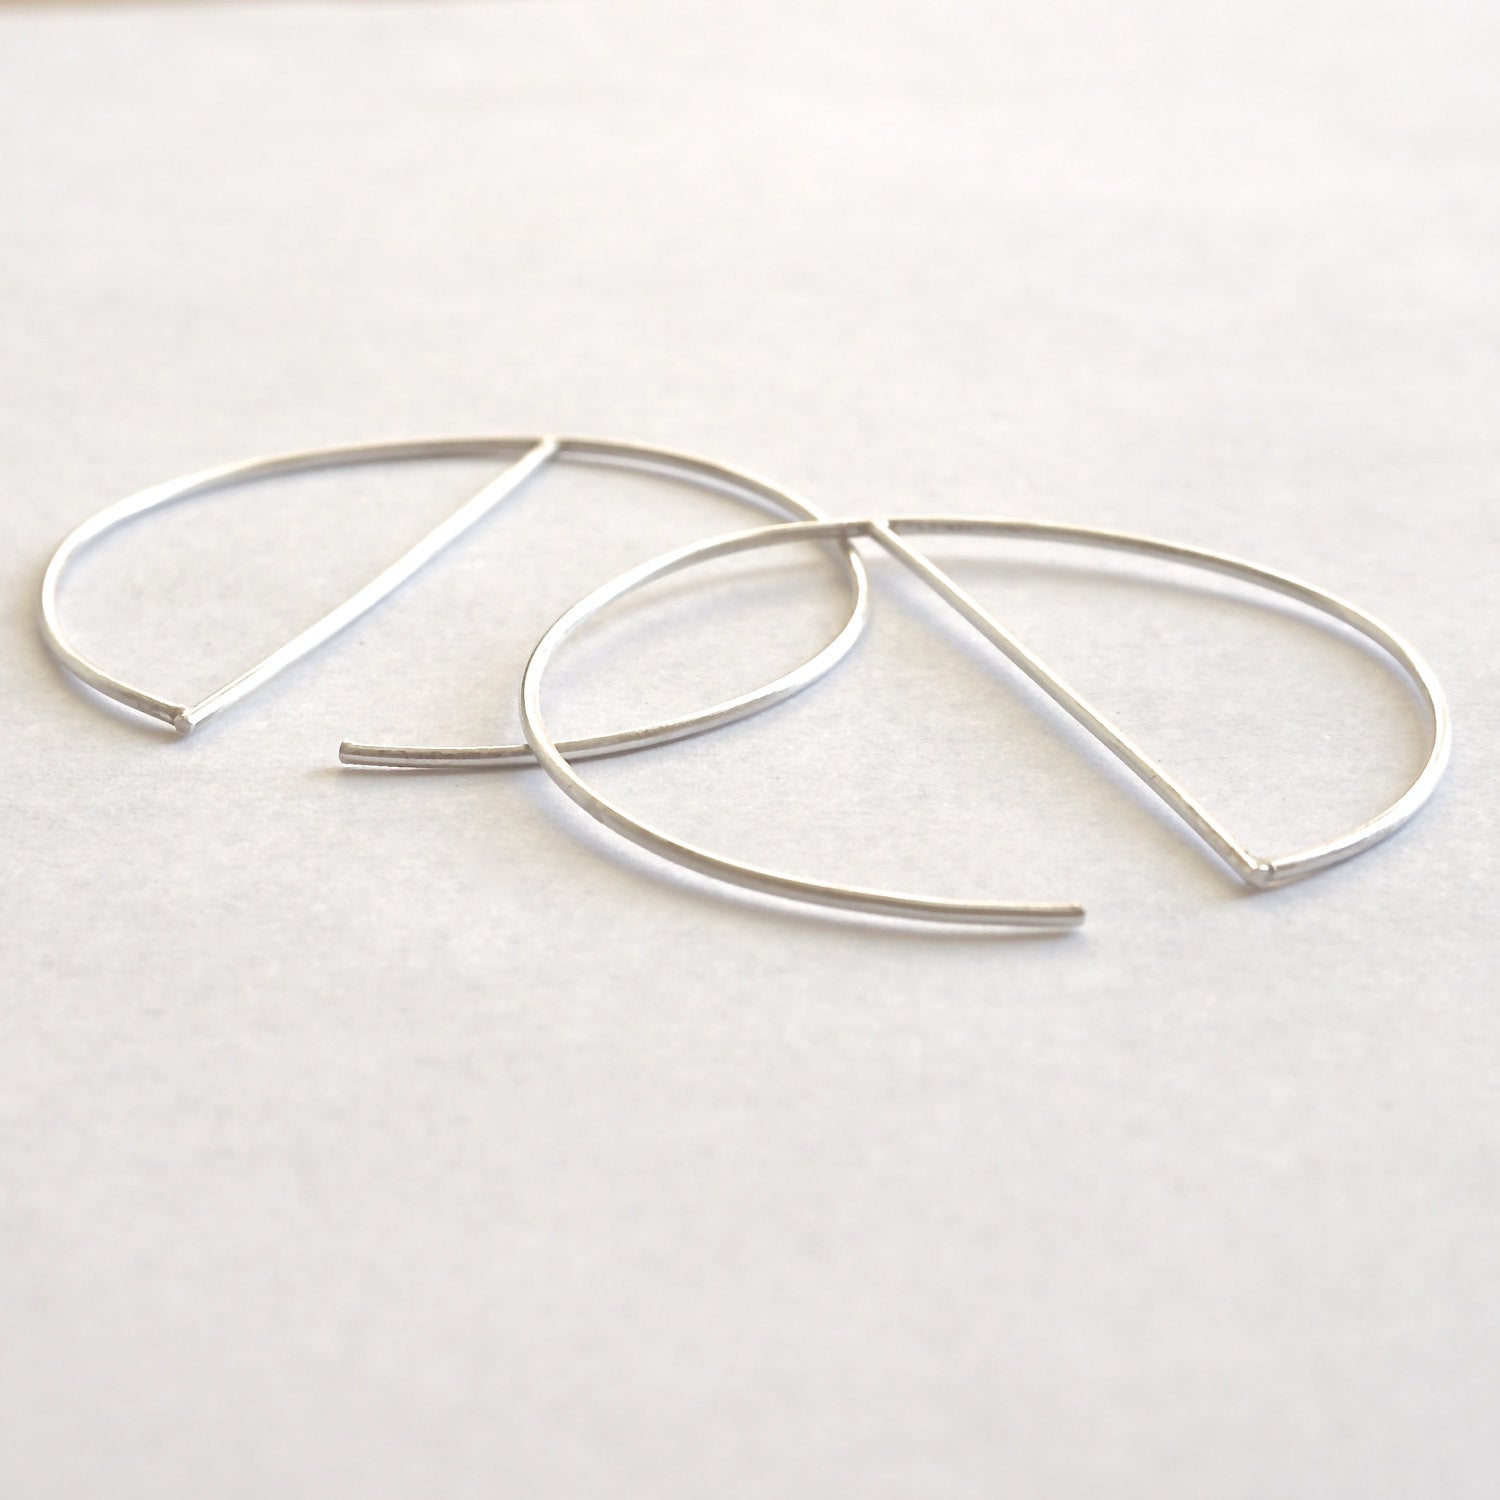 Contemporary Designed - Minimalist and Hand-Made, Open Hoop Dangle Earrings - 0259